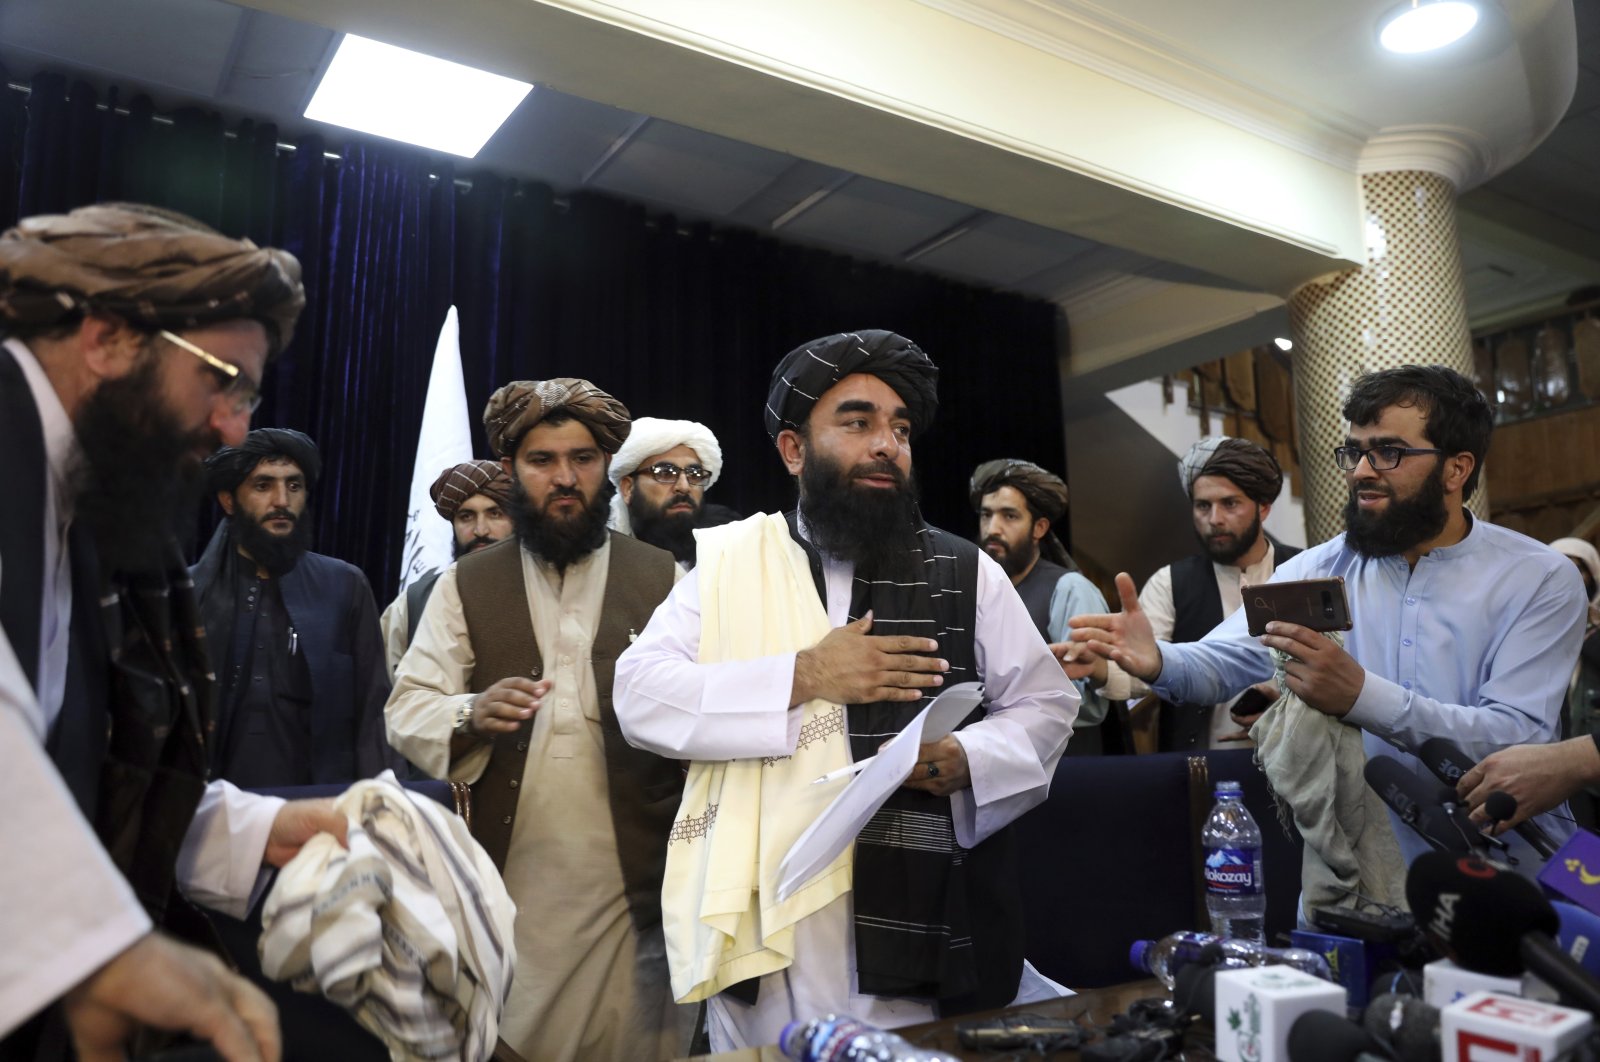 Taliban spokesperson Zabihullah Mujahid (C) leaves after his first news conference, in Kabul, Afghanistan, Aug. 17, 2021. (AP Photo)